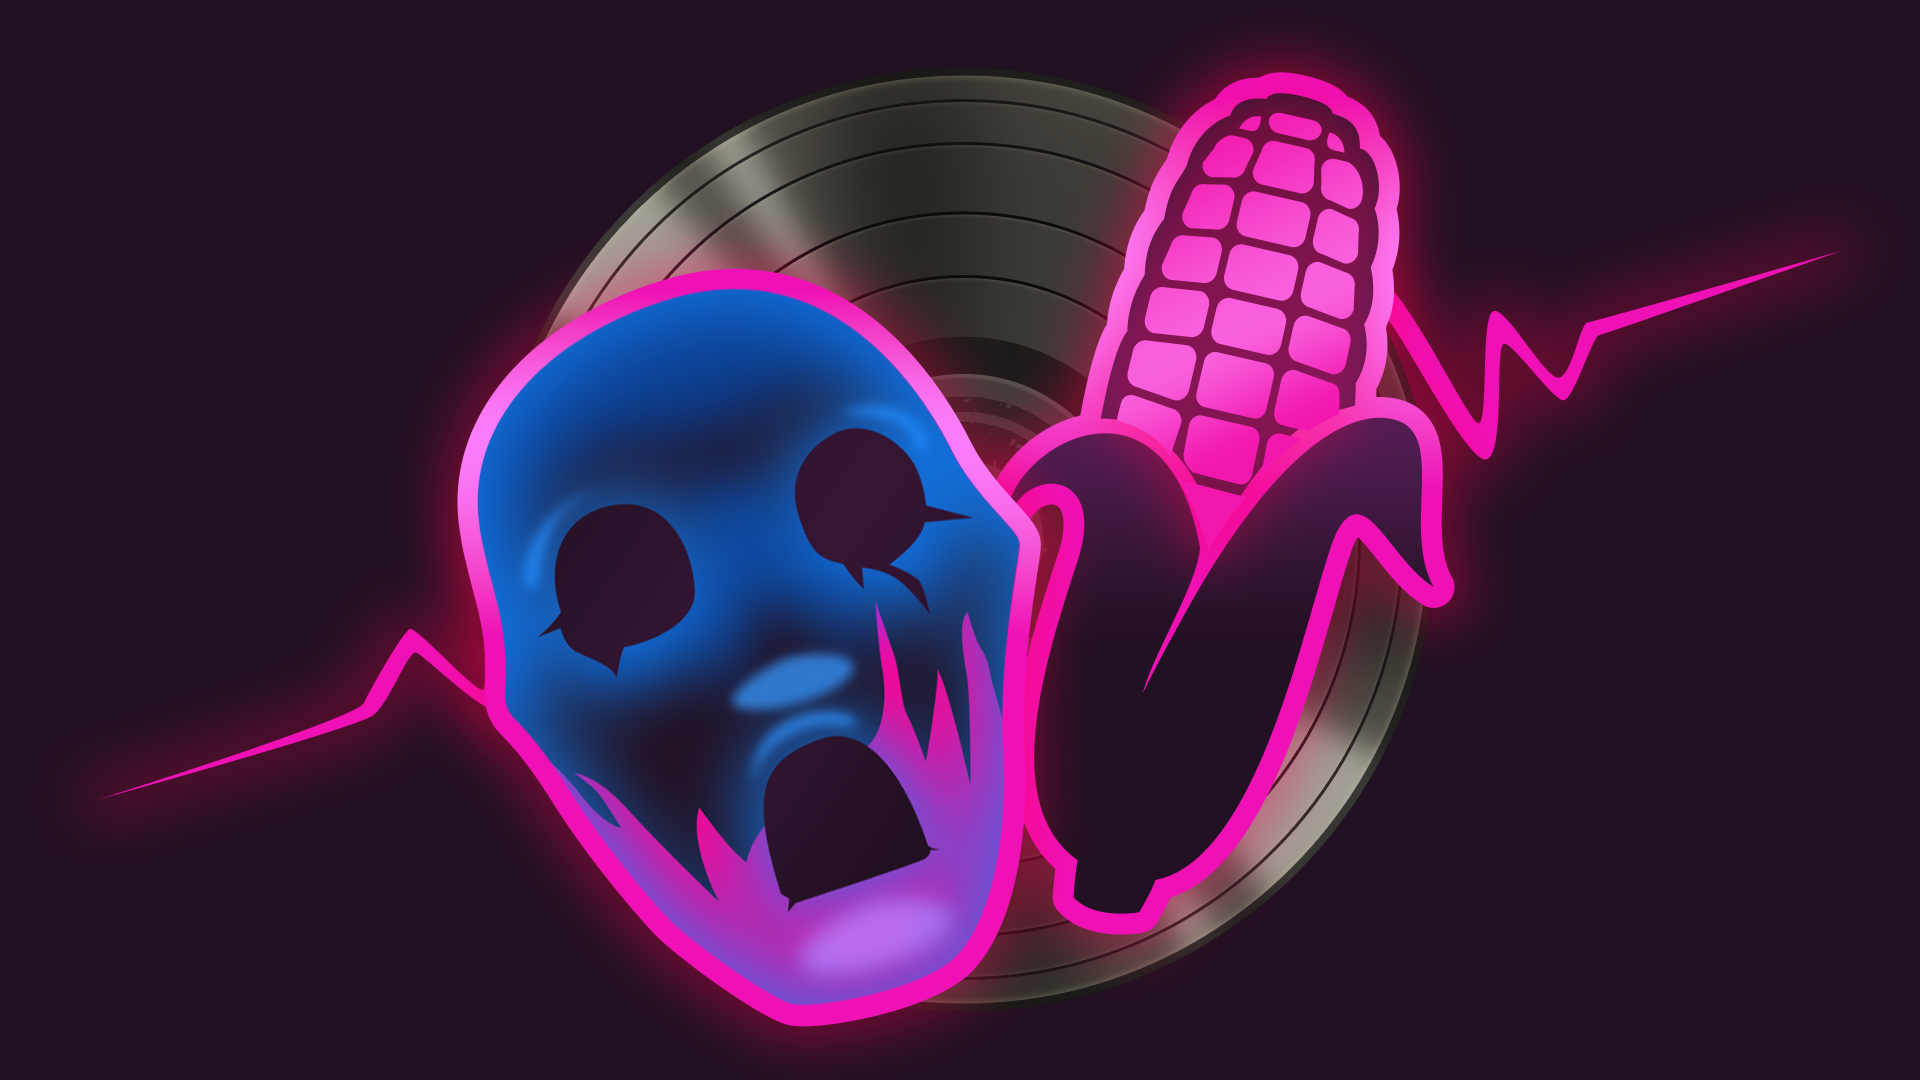 Icon for Child of the Corn Maze